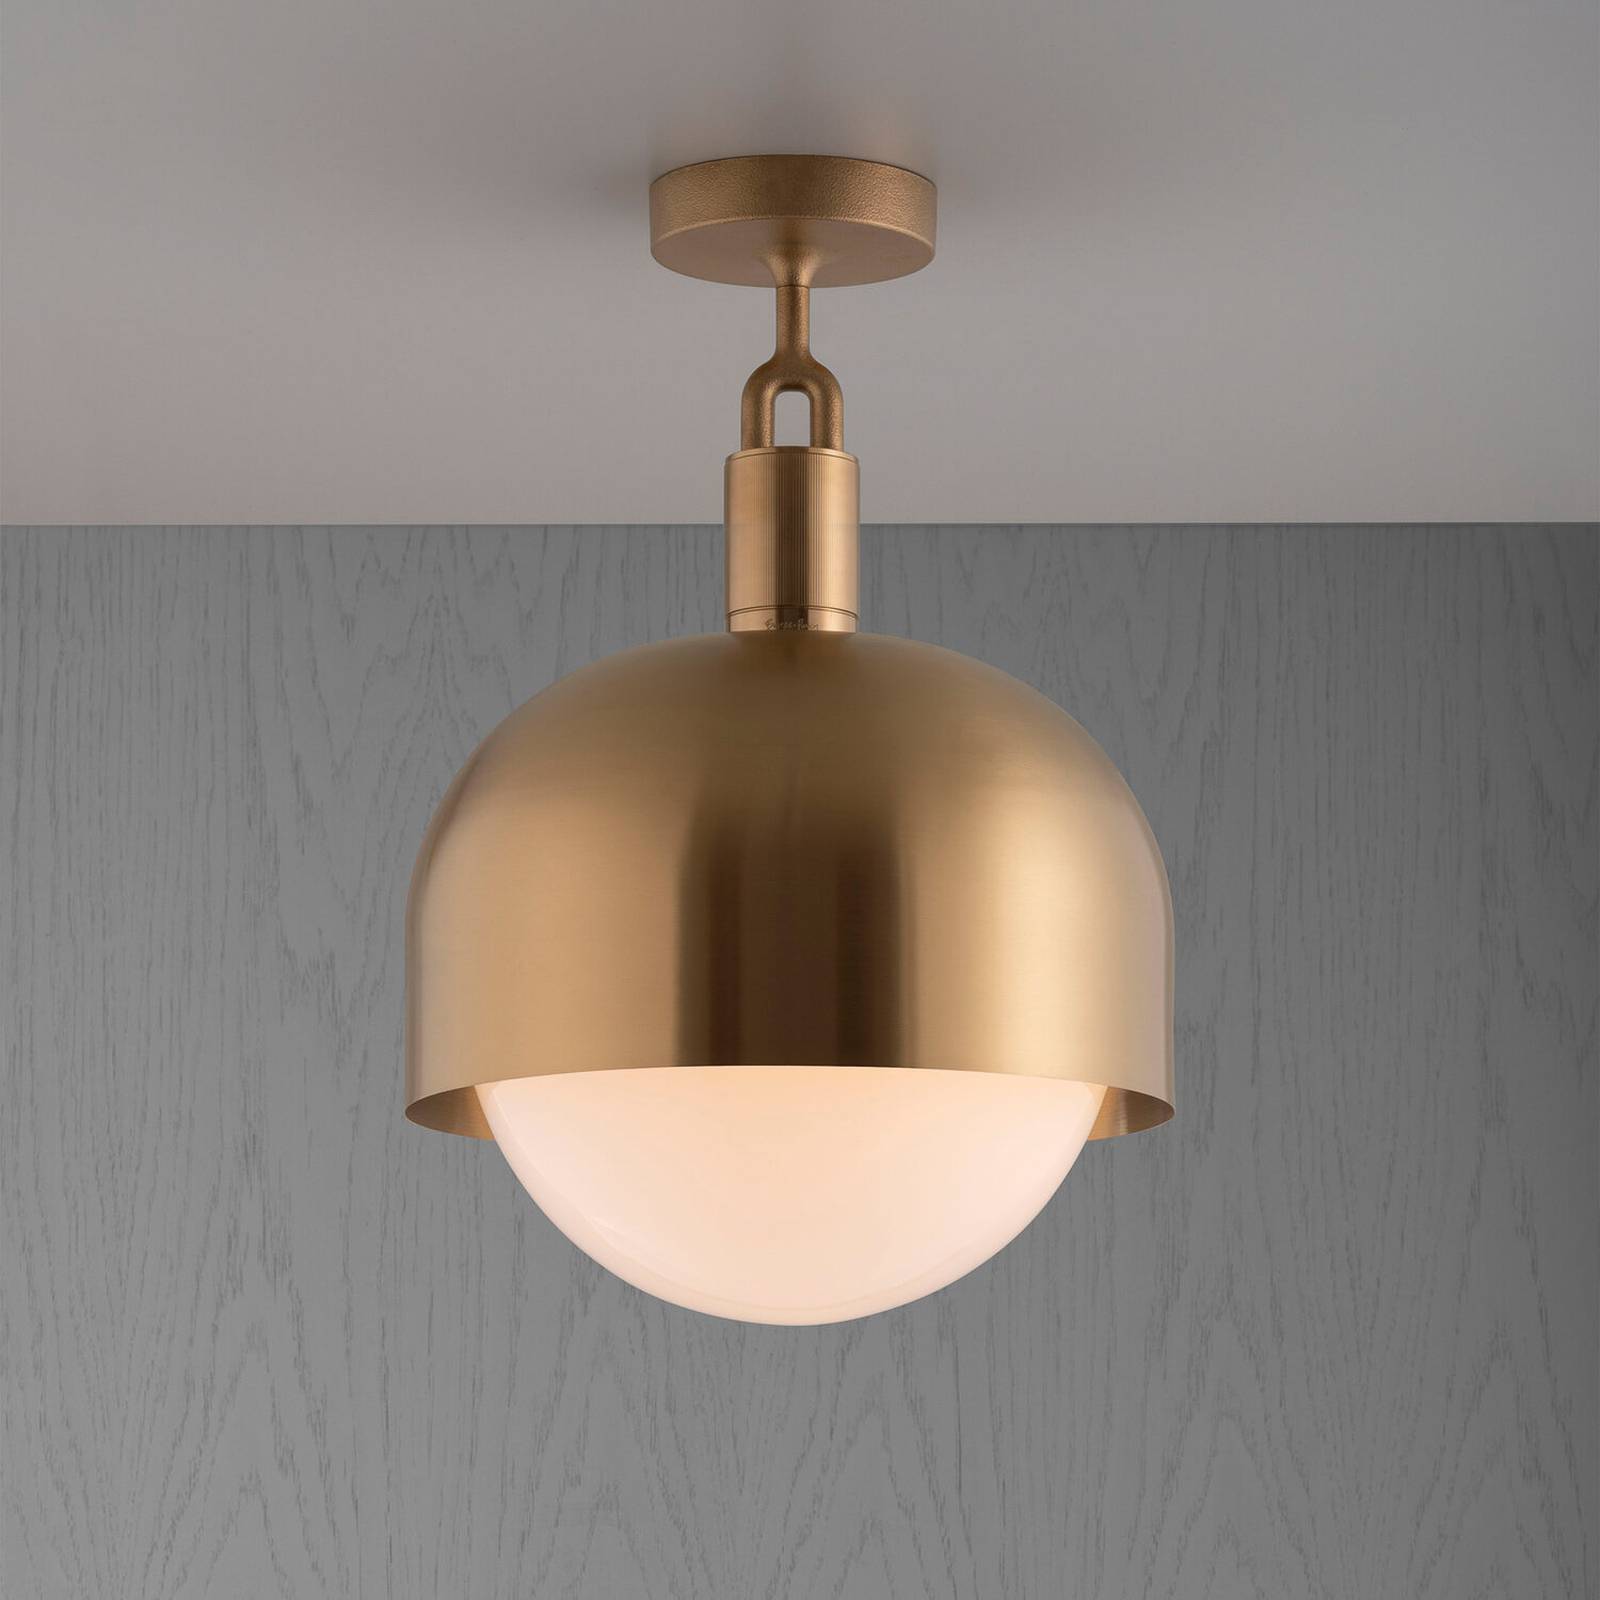 Image of Buster + Punch Forked plafond laiton/opale Ø 34cm 